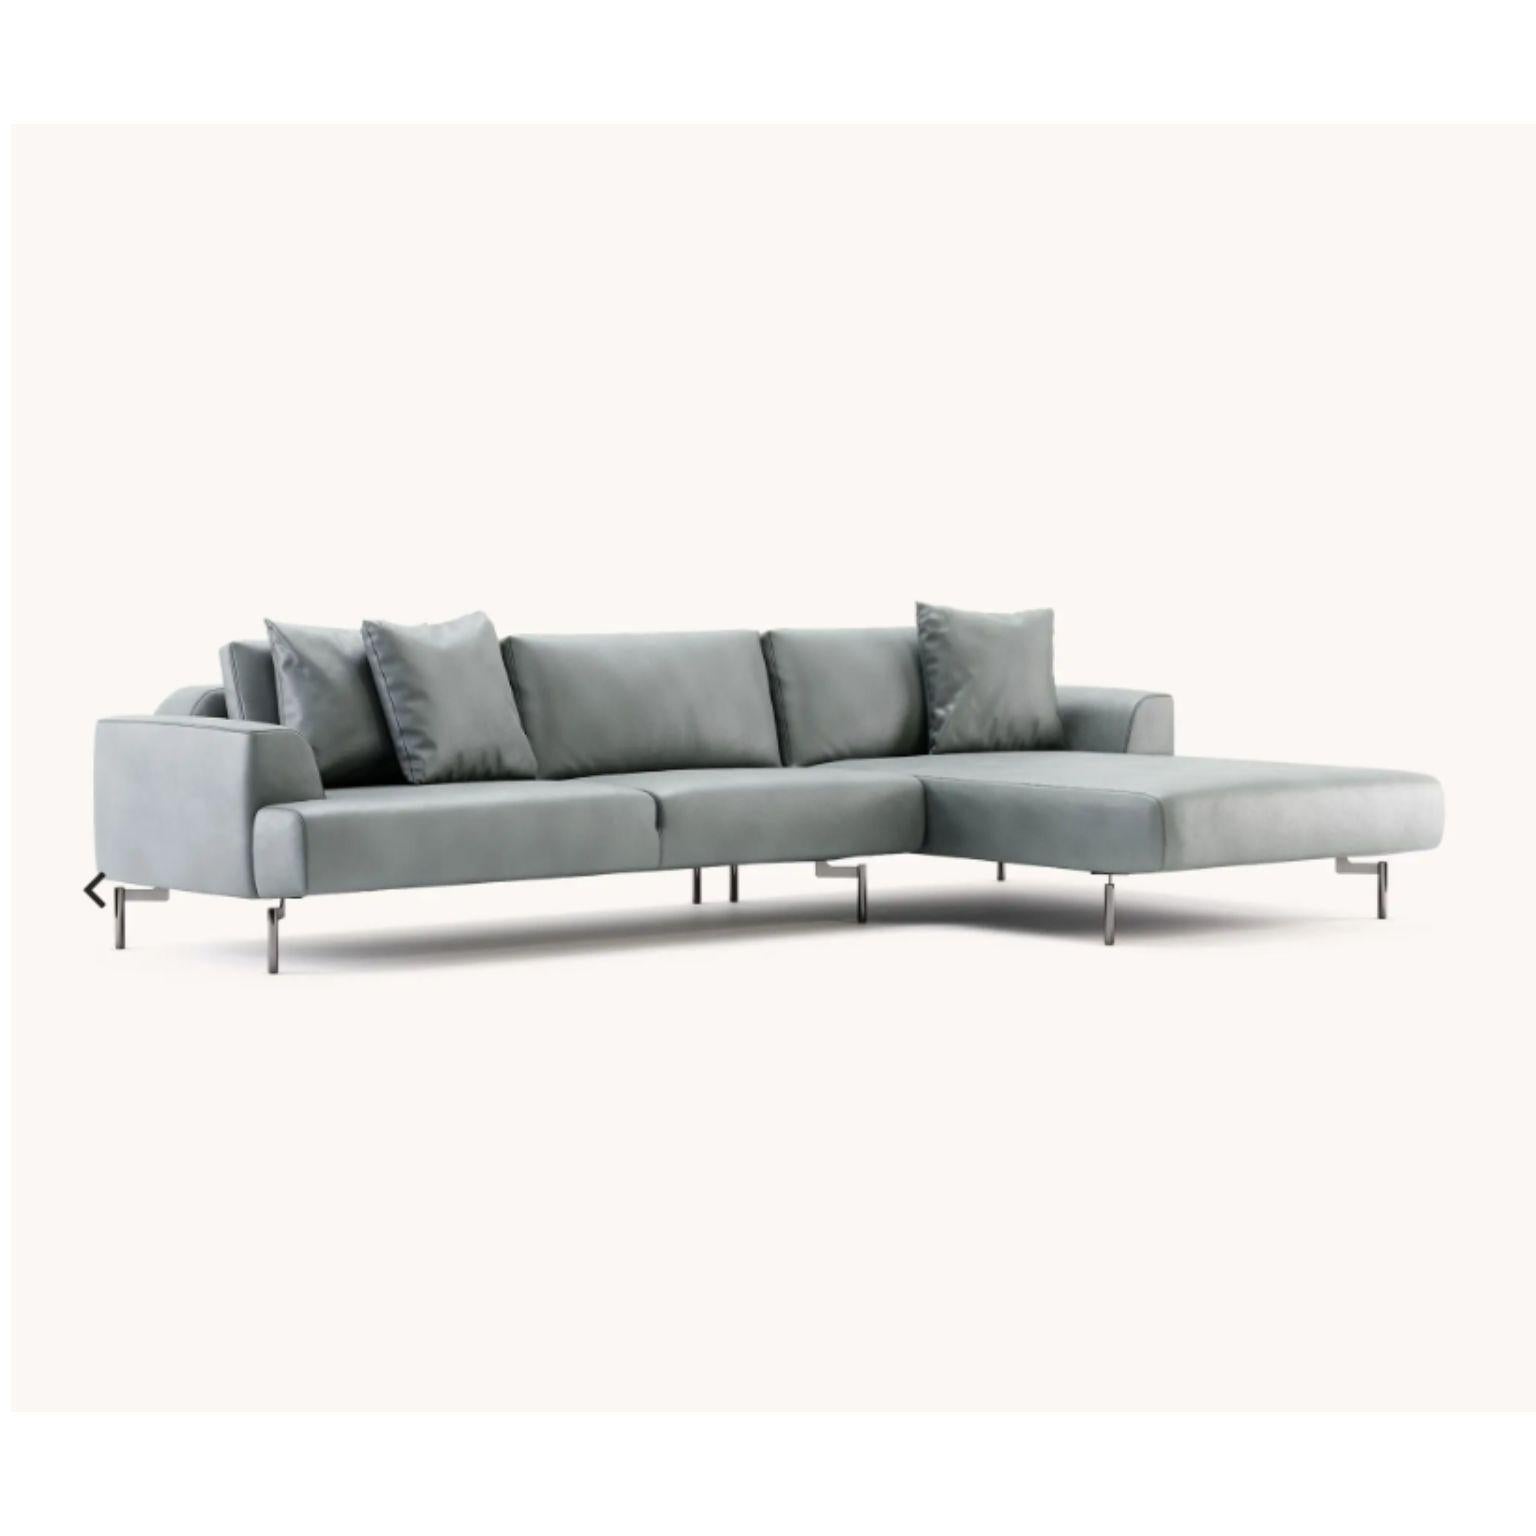 Taís Chaise sofa by Domkapa
Materials: Natural leather (Desna Polvere), polished stainless steel. 
Dimensions: W 321 x D 185 x H 88 cm.
Also available in different materials.
with 3 pillows included in the same fabric as the structure(50x50